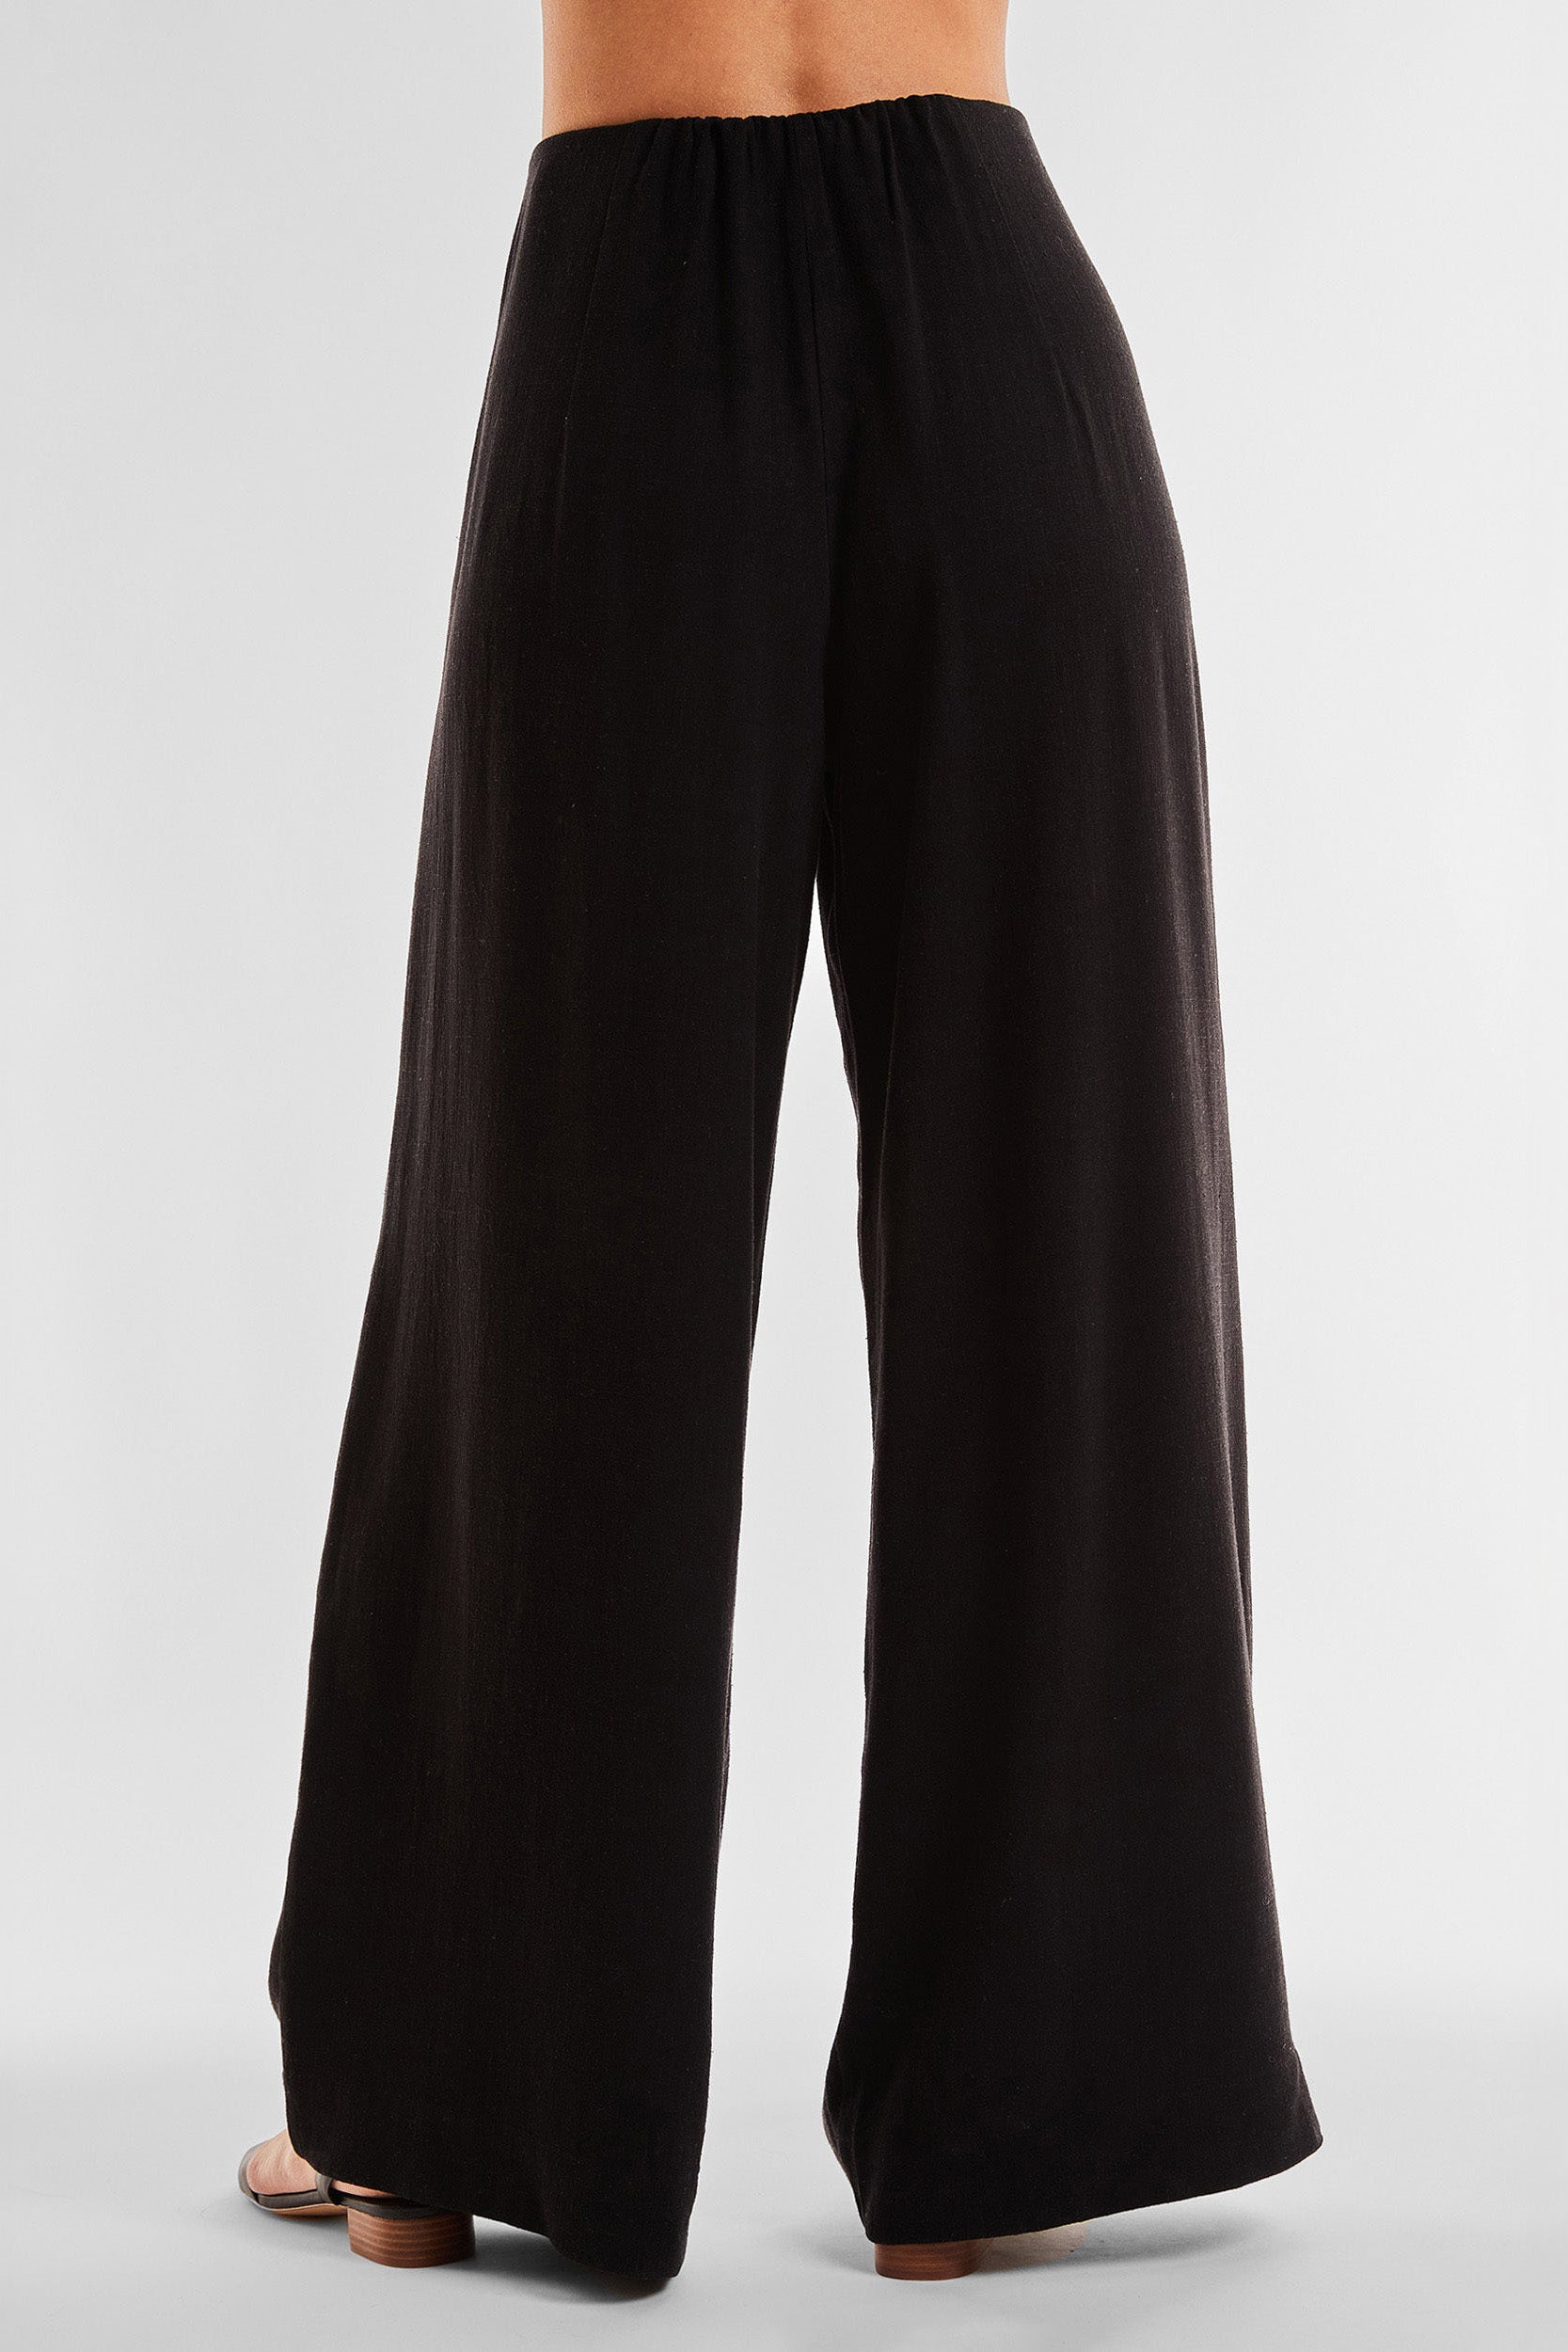 A person is shown from the waist down, wearing the Seychelles Relaxed Linen Pant - Black. The high-rise, wide-leg pants are made of a lightweight fabric and the person is standing against a plain white background.